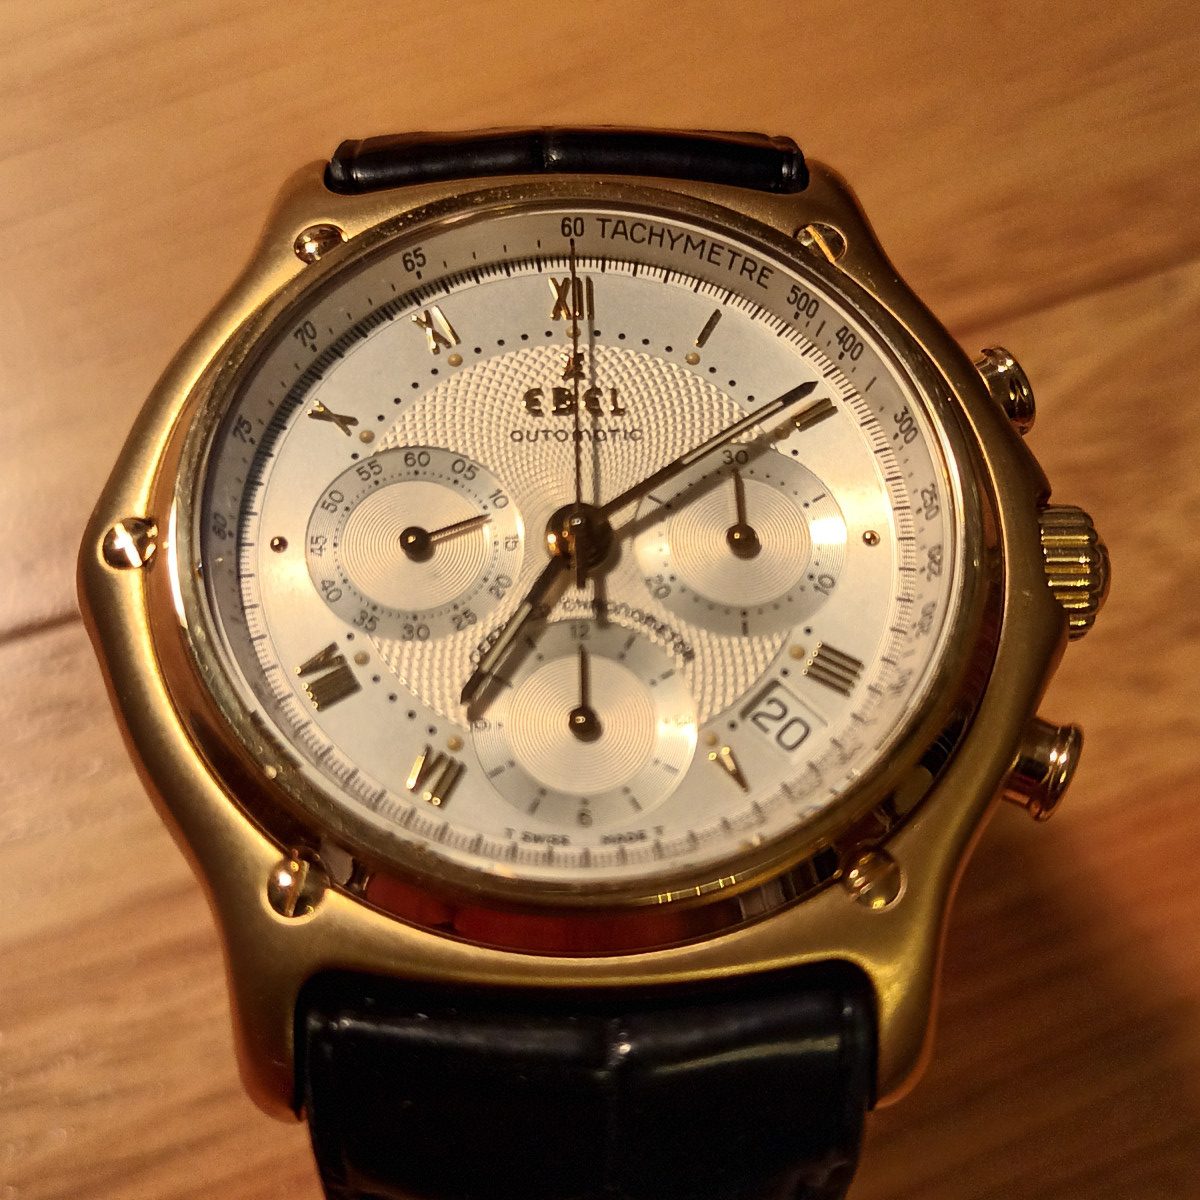 Ebel 1911 Gold Chronograph – An Architect Of Time?